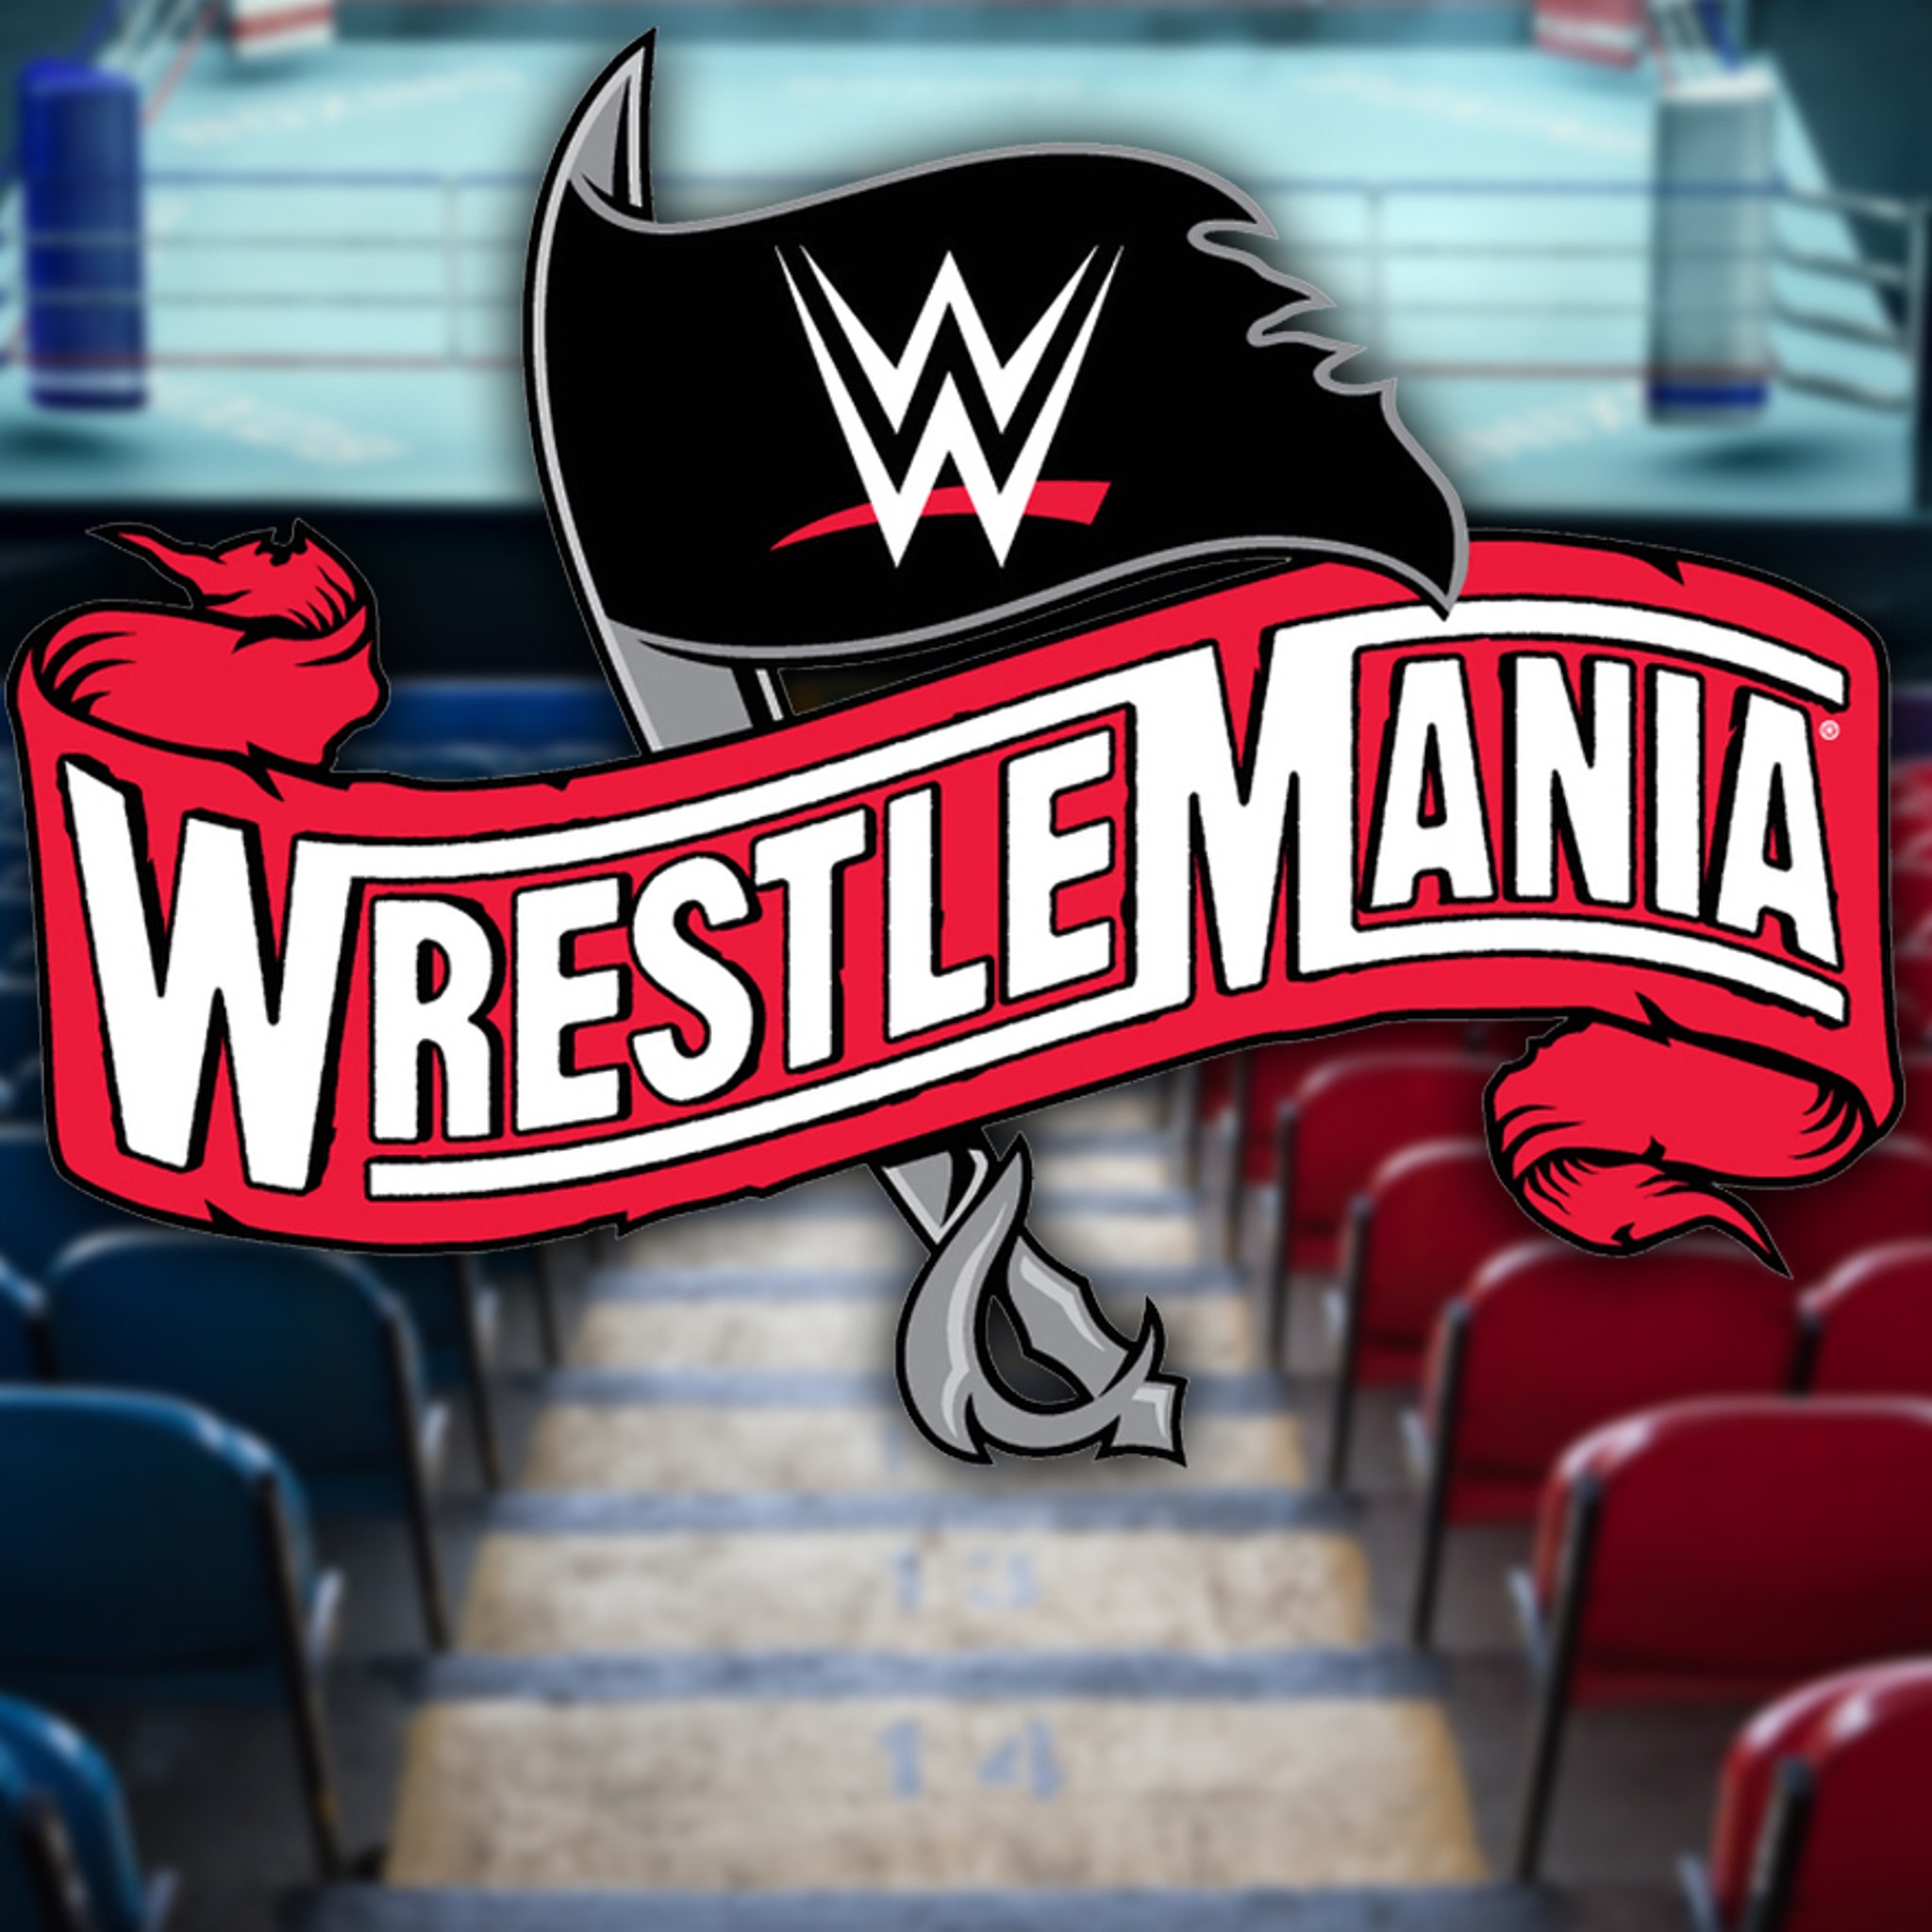 WrestleMania 36 Bans Fans, Will Stream Live from Training Facility